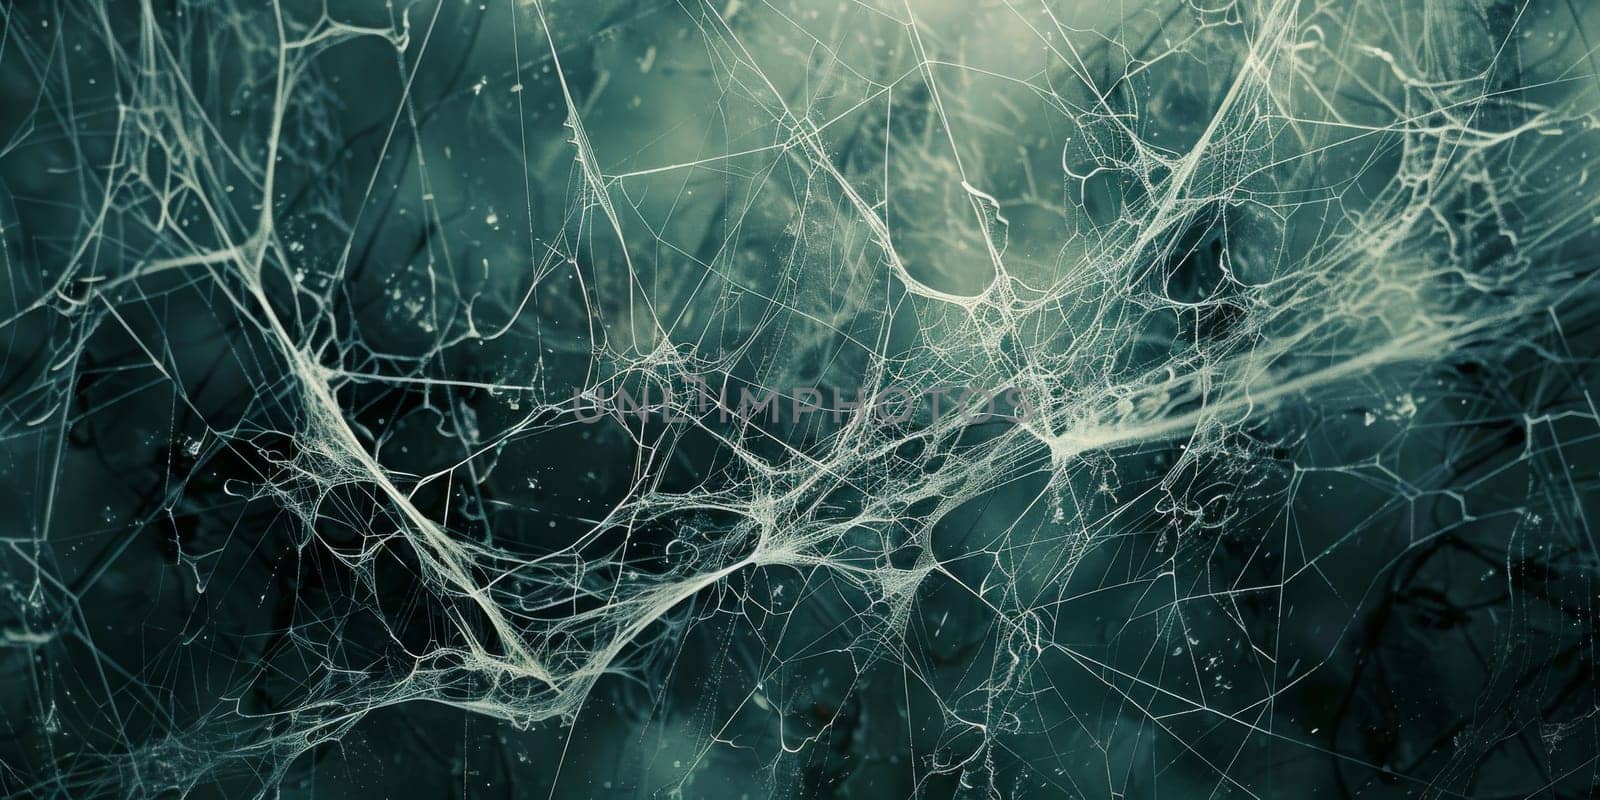 Dive into the labyrinthine structure of spider's web